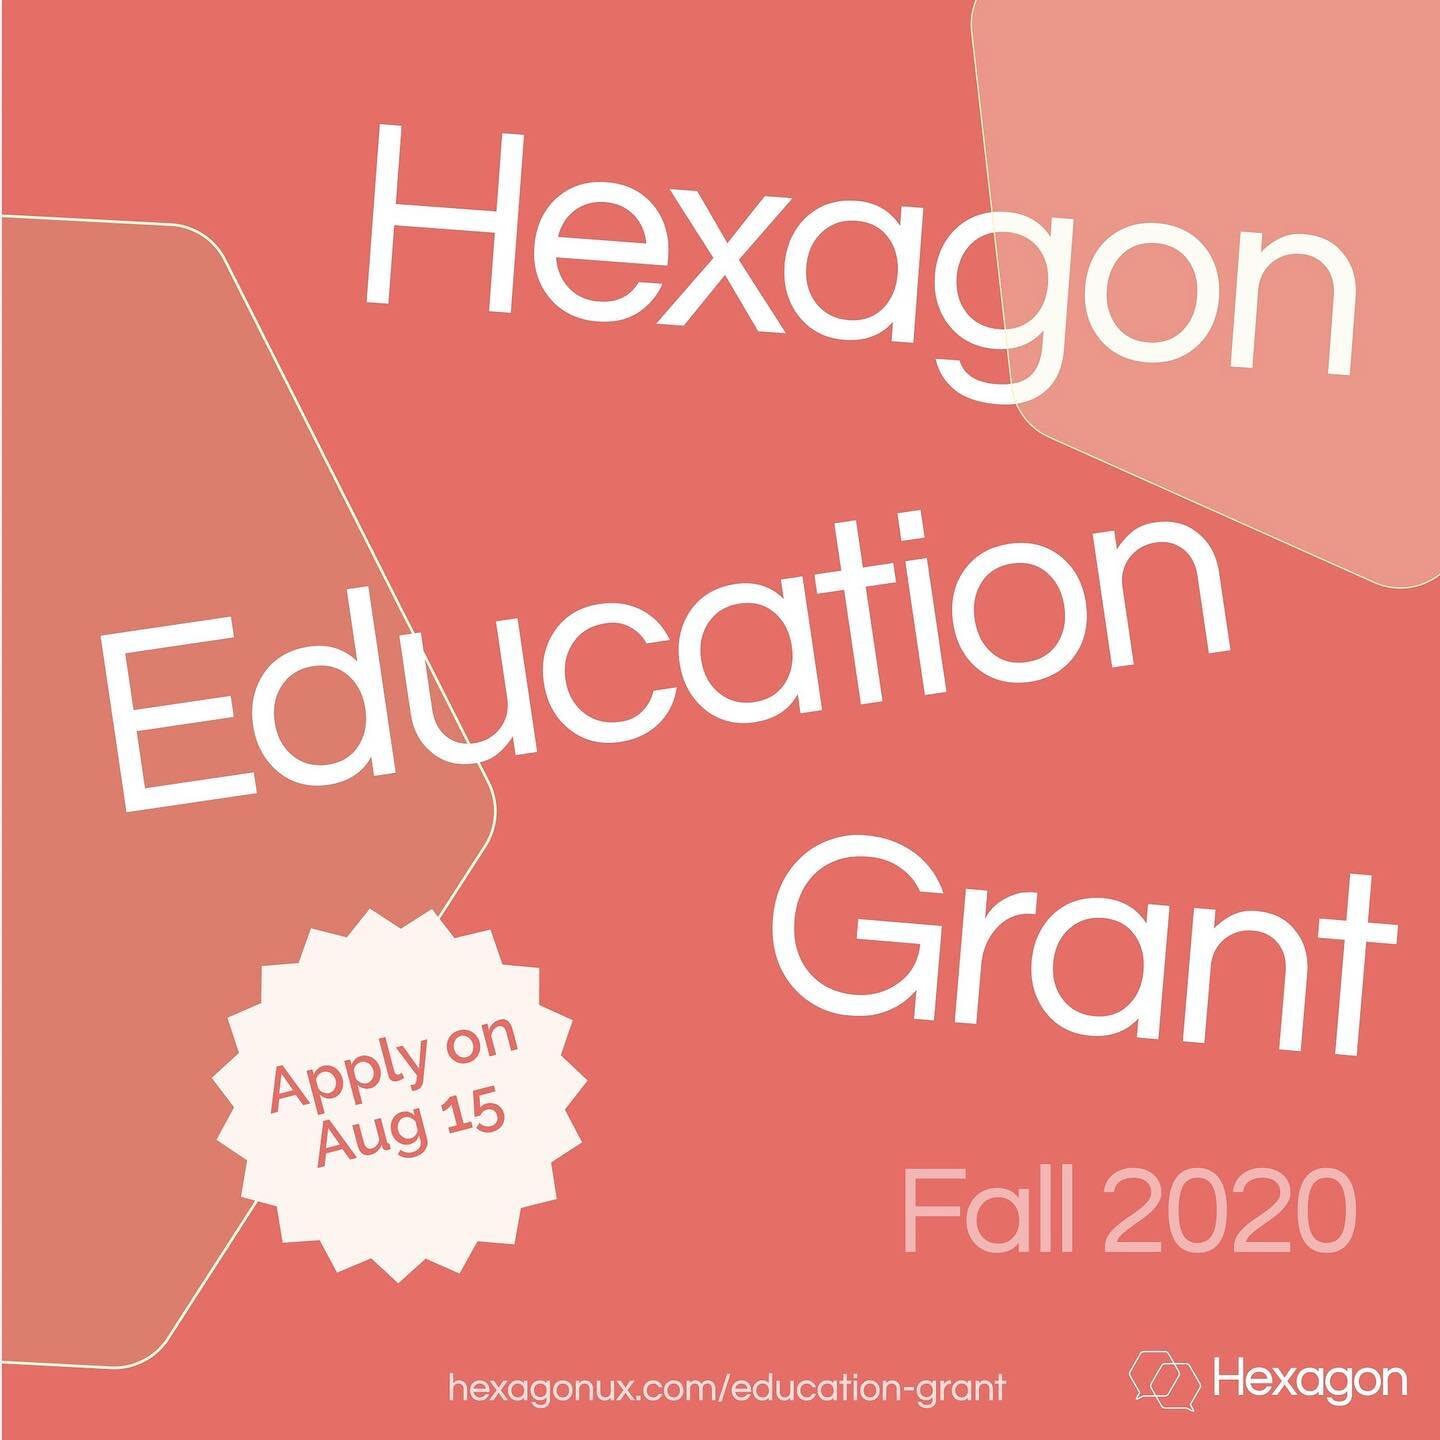 Our bi-annual Education Grant is coming soon! Applications go live on Aug 15. Link in bio! 

#womeninux #womenintech #nonbinaryintech #inclusion #diversityandinclusion #diversity #educationgrant #scholarship #hexagonux